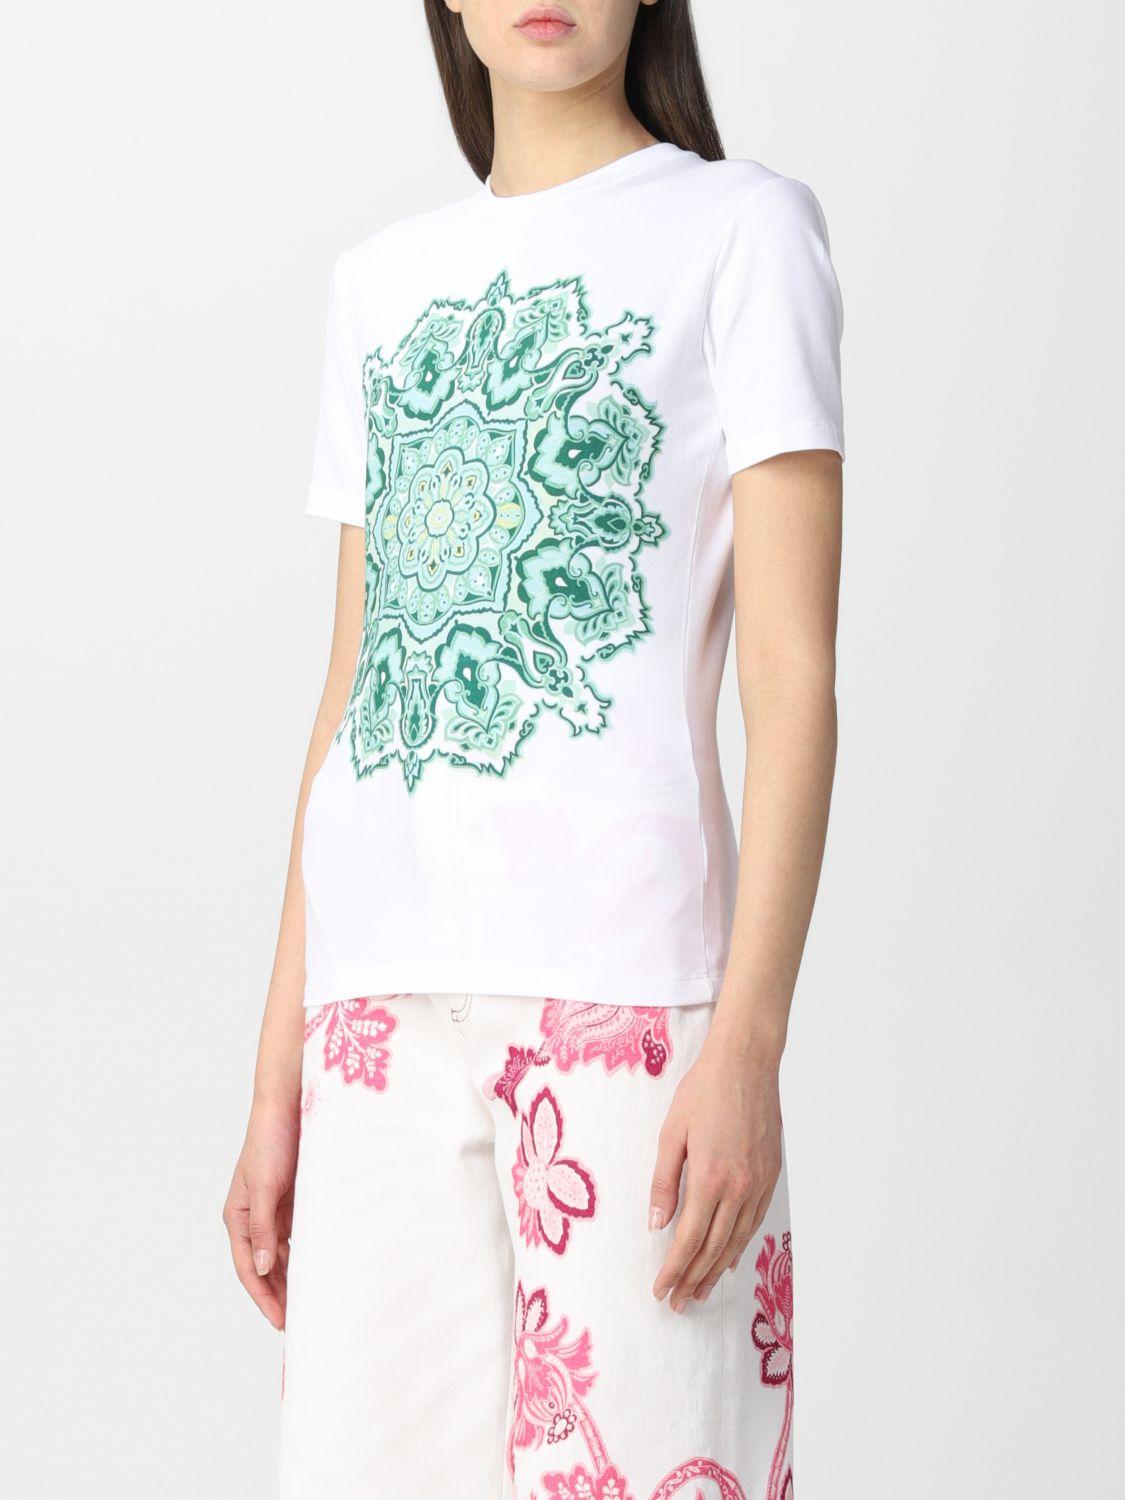 Etro Green Mandala Print Graphic T-Shirt Size S NWT In New Condition For Sale In Paradise Island, BS